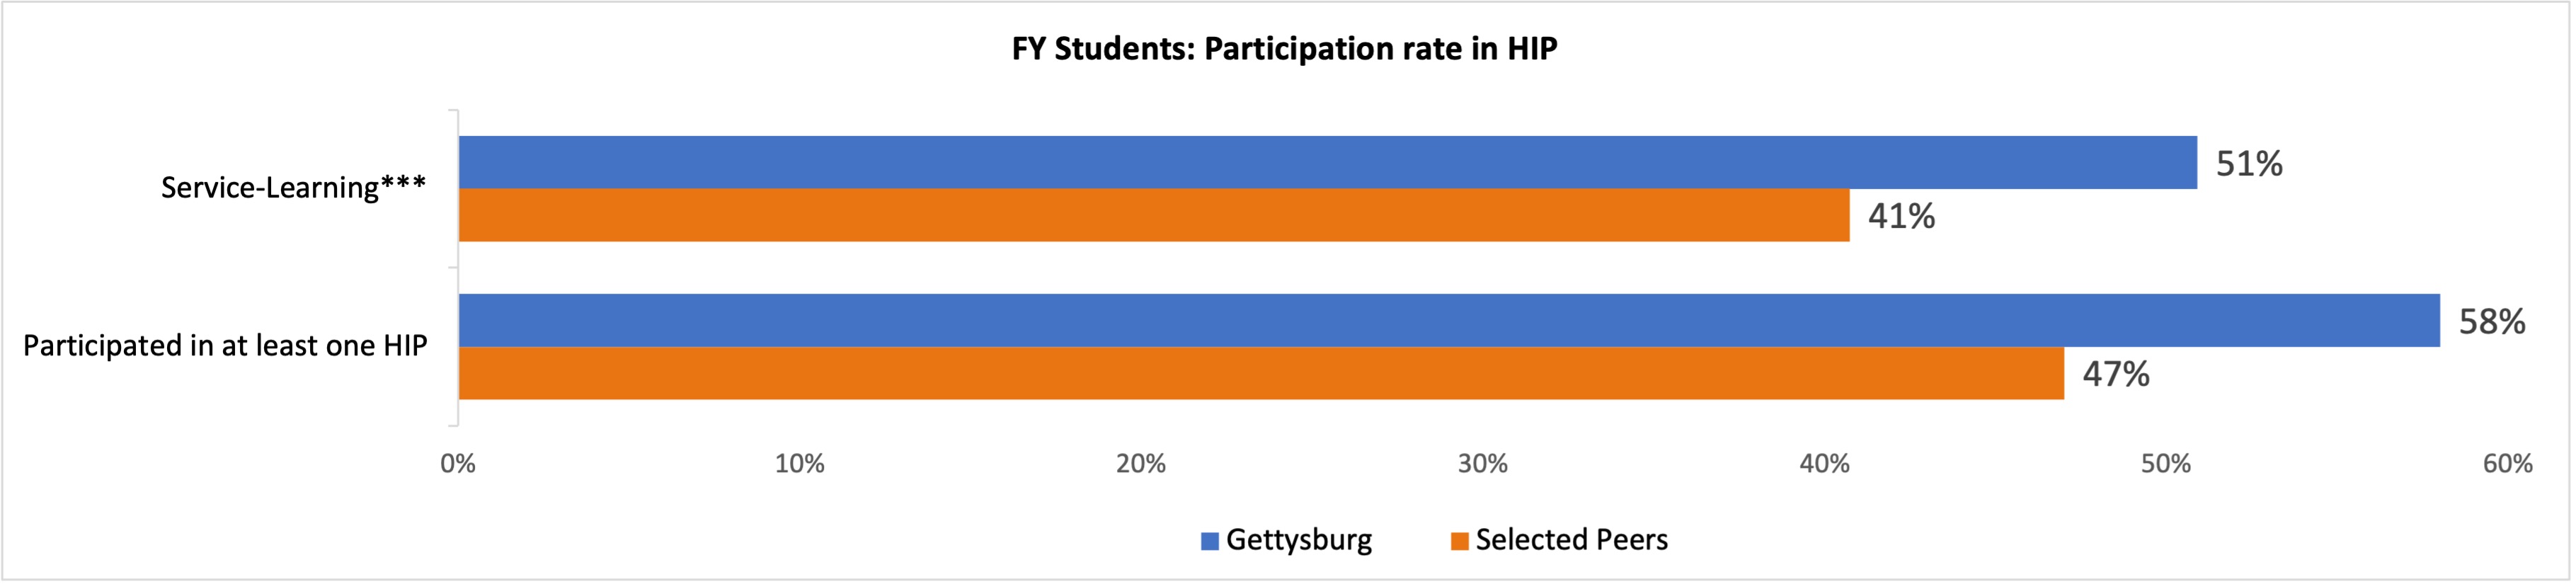 Participation in High-Impact Practices chart - see table below for data